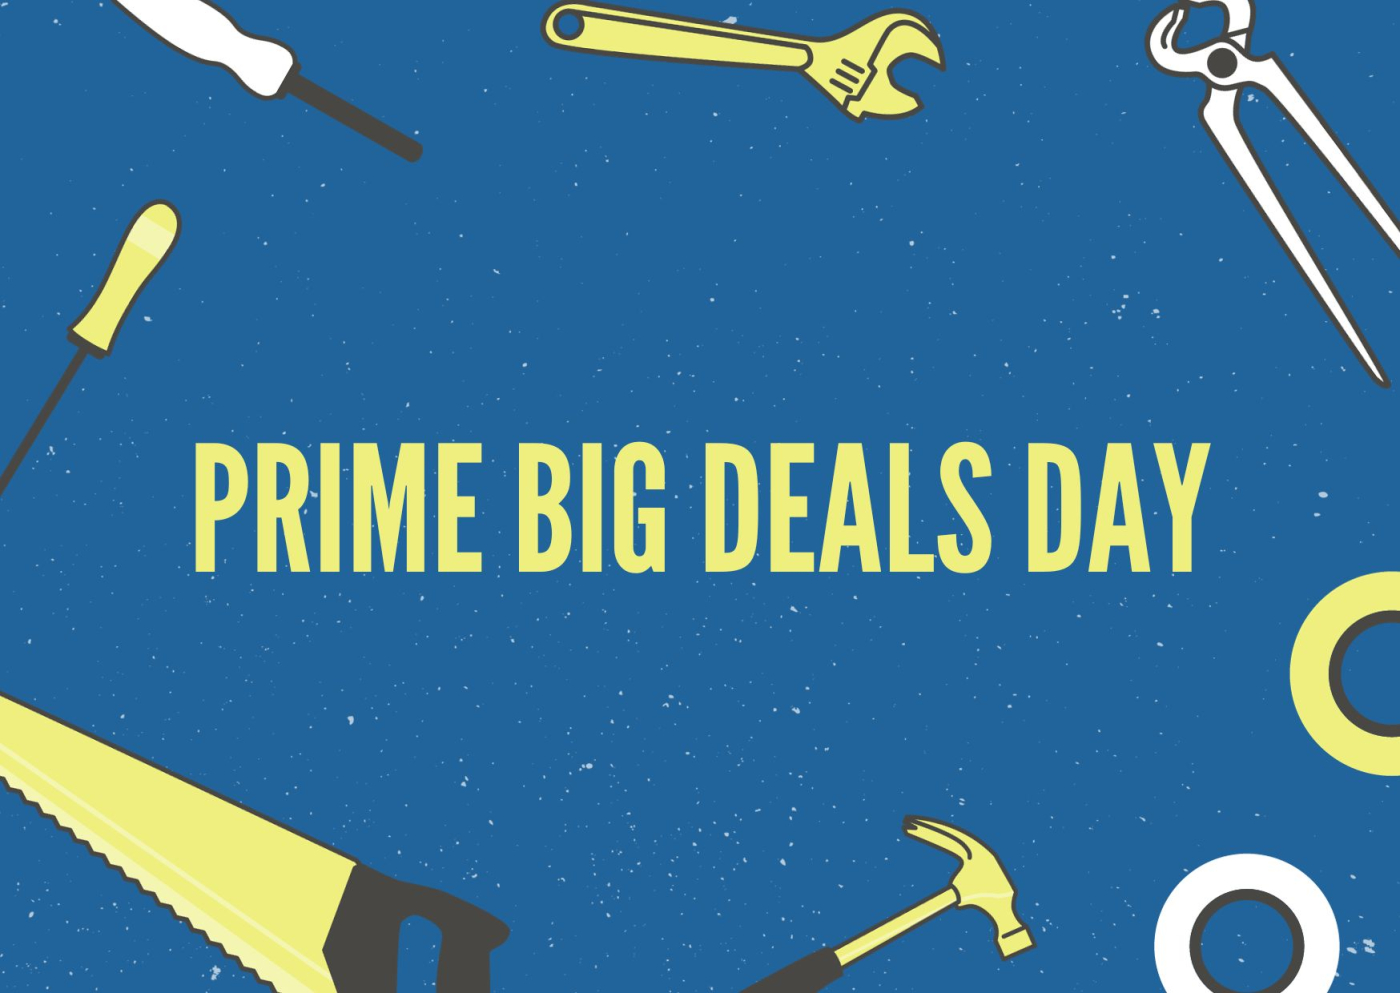 Tools and tips to get the best deals on  Prime